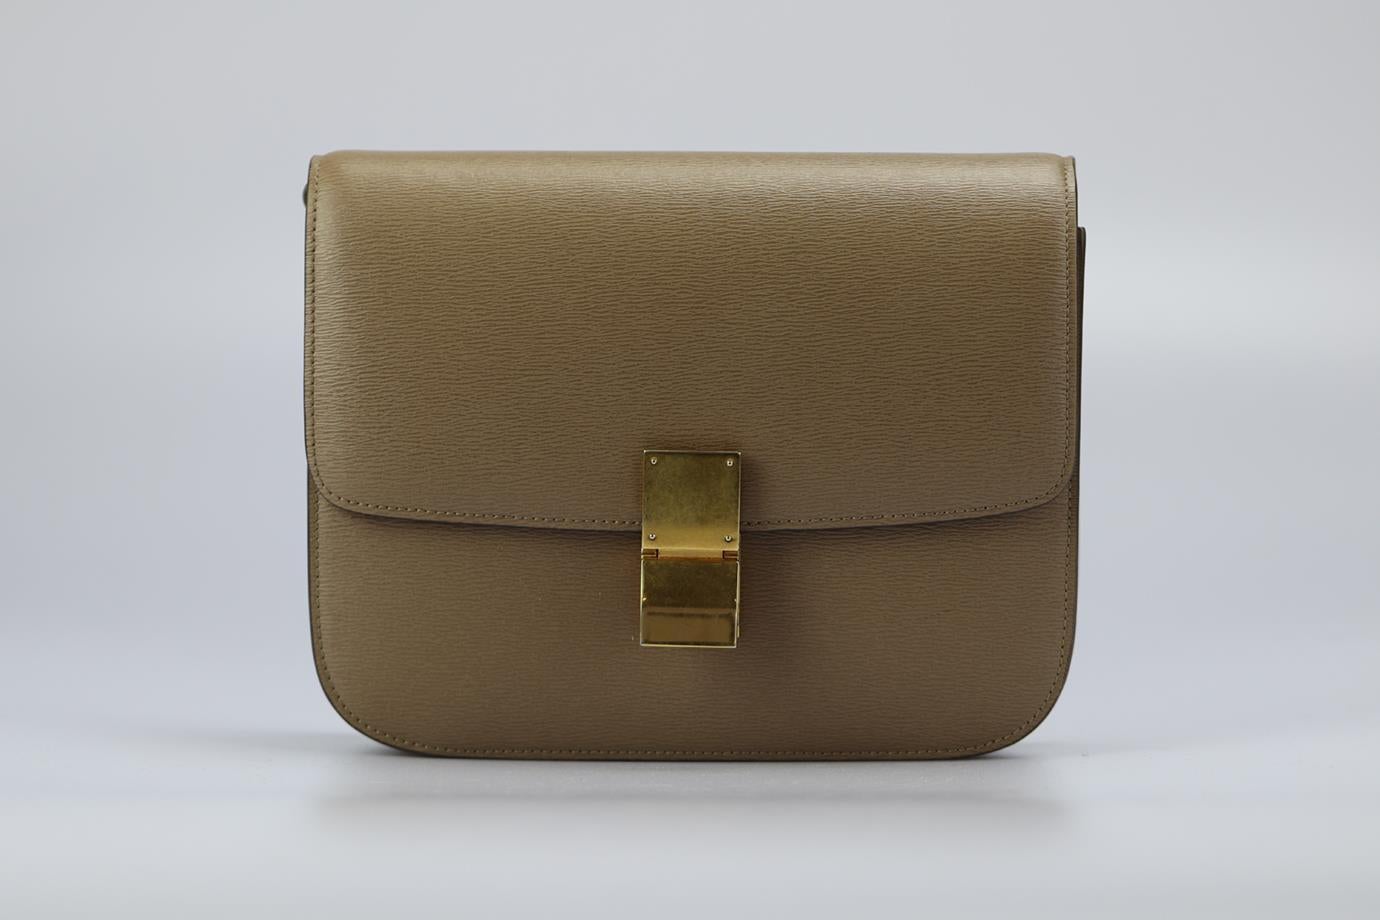 Celine Classic Box Medium Textured Leathger Shoulder Bag. Khaki-green. Push lock fastening - Front. Comes with - dustbag. Height: 8.2 In. Width: 9.2 In. Depth: 1.7 In. Strap drop: 17.4 In. Condition: Used. Very good condition - Barely used. No sign